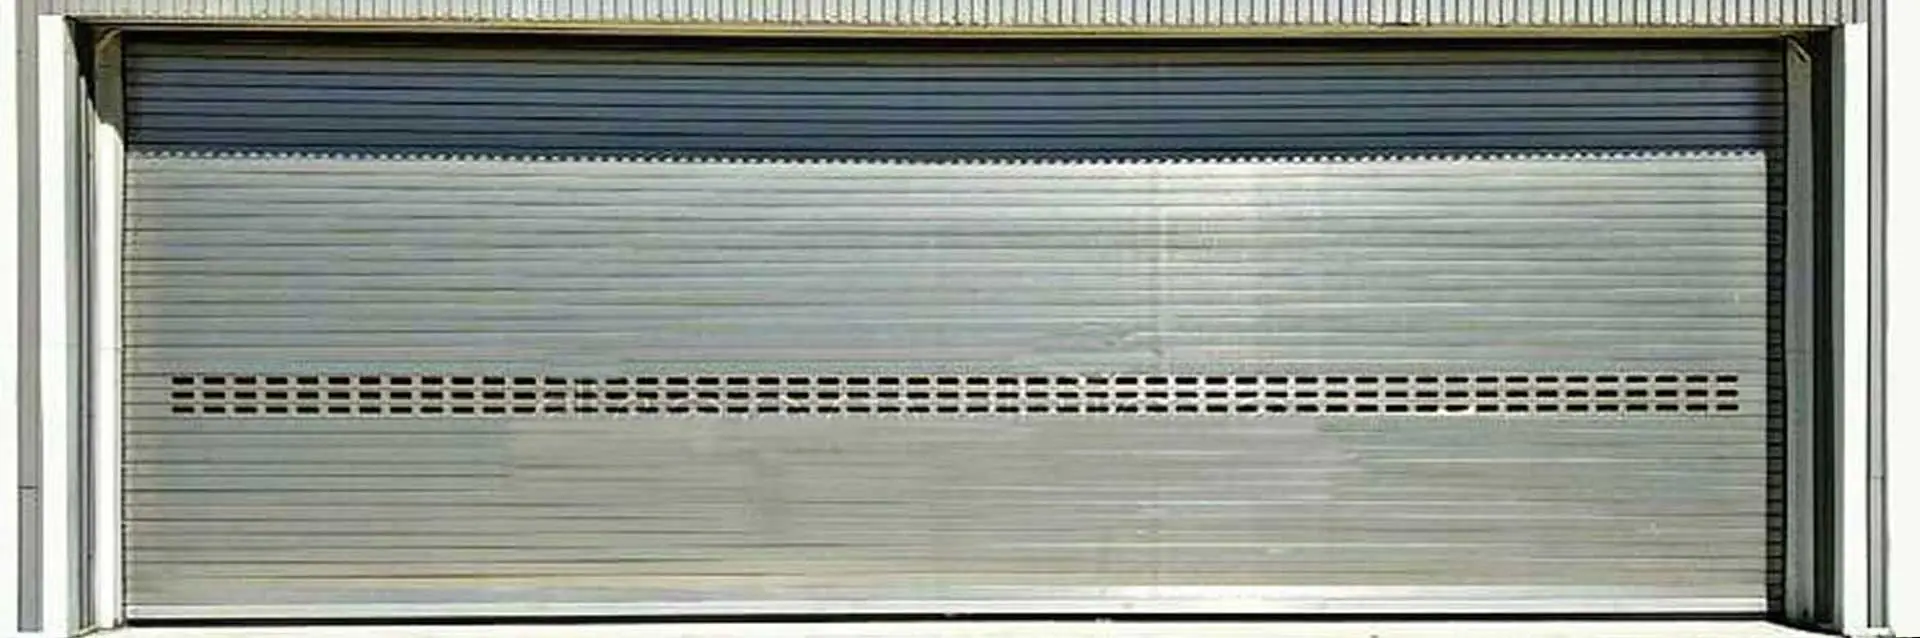 Ideal Shutters Automation Private Limited. Banner